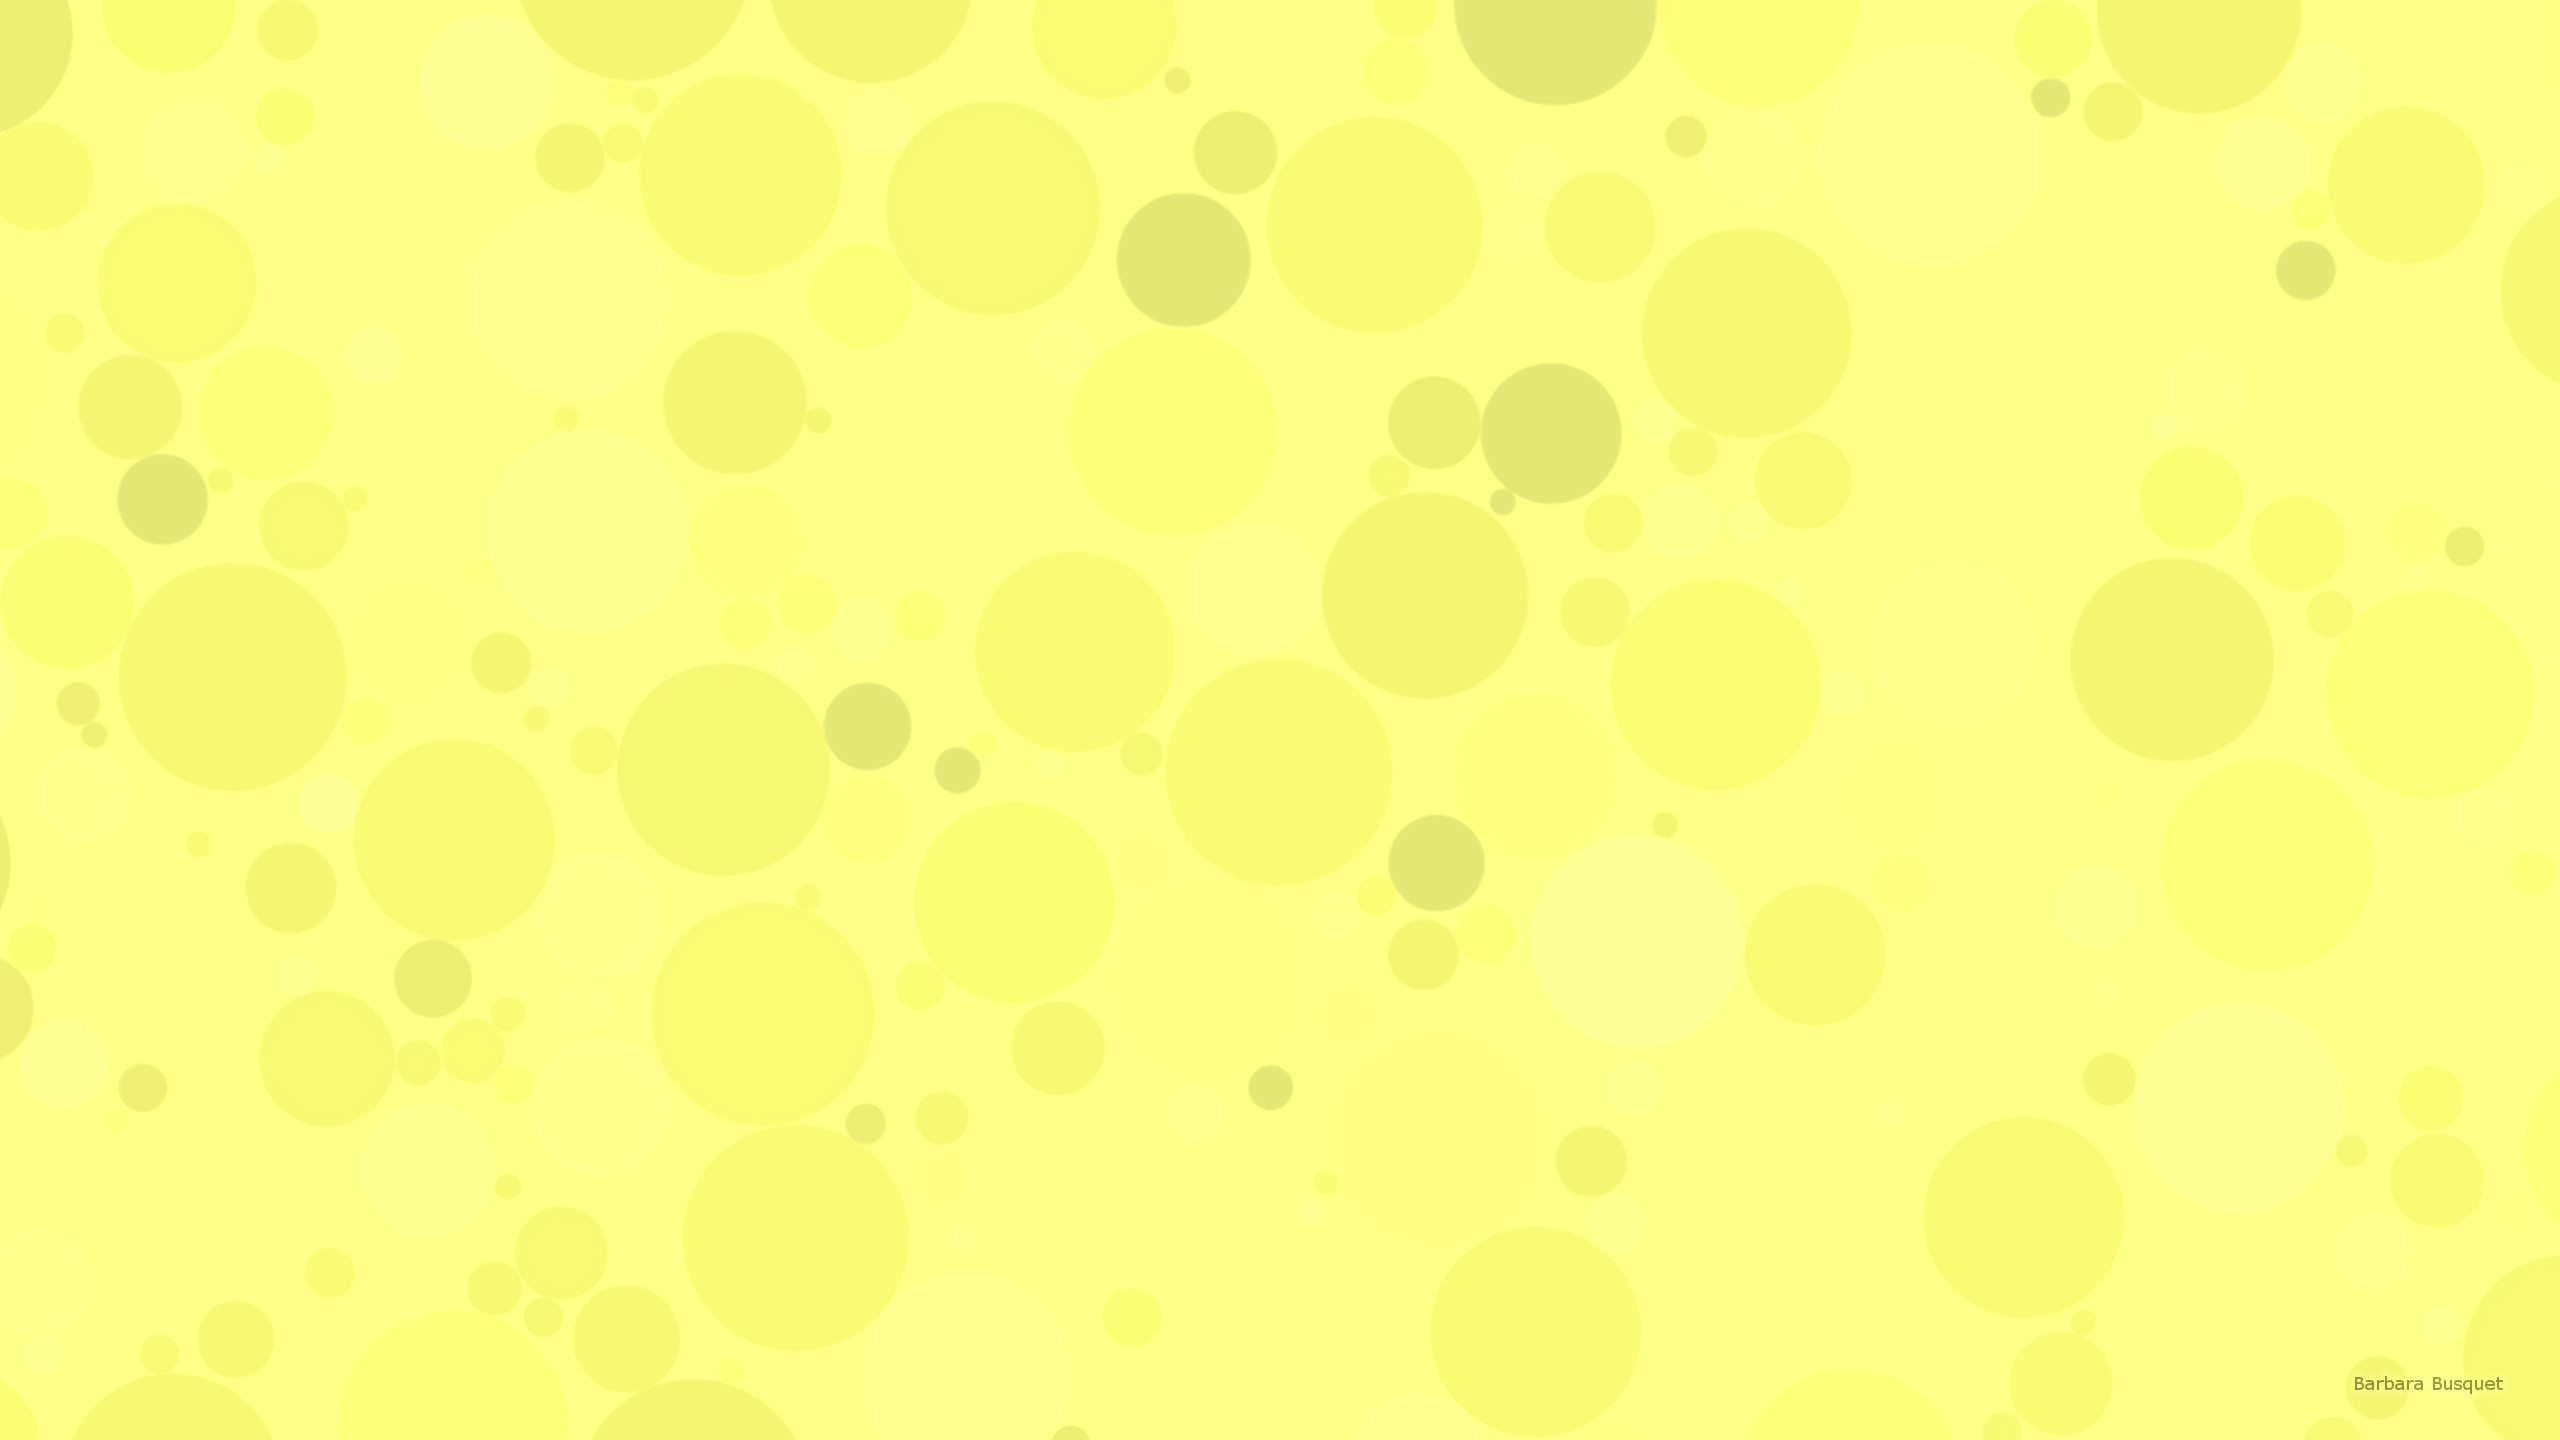 2560x1440 Yellow pattern wallpaper with circles.